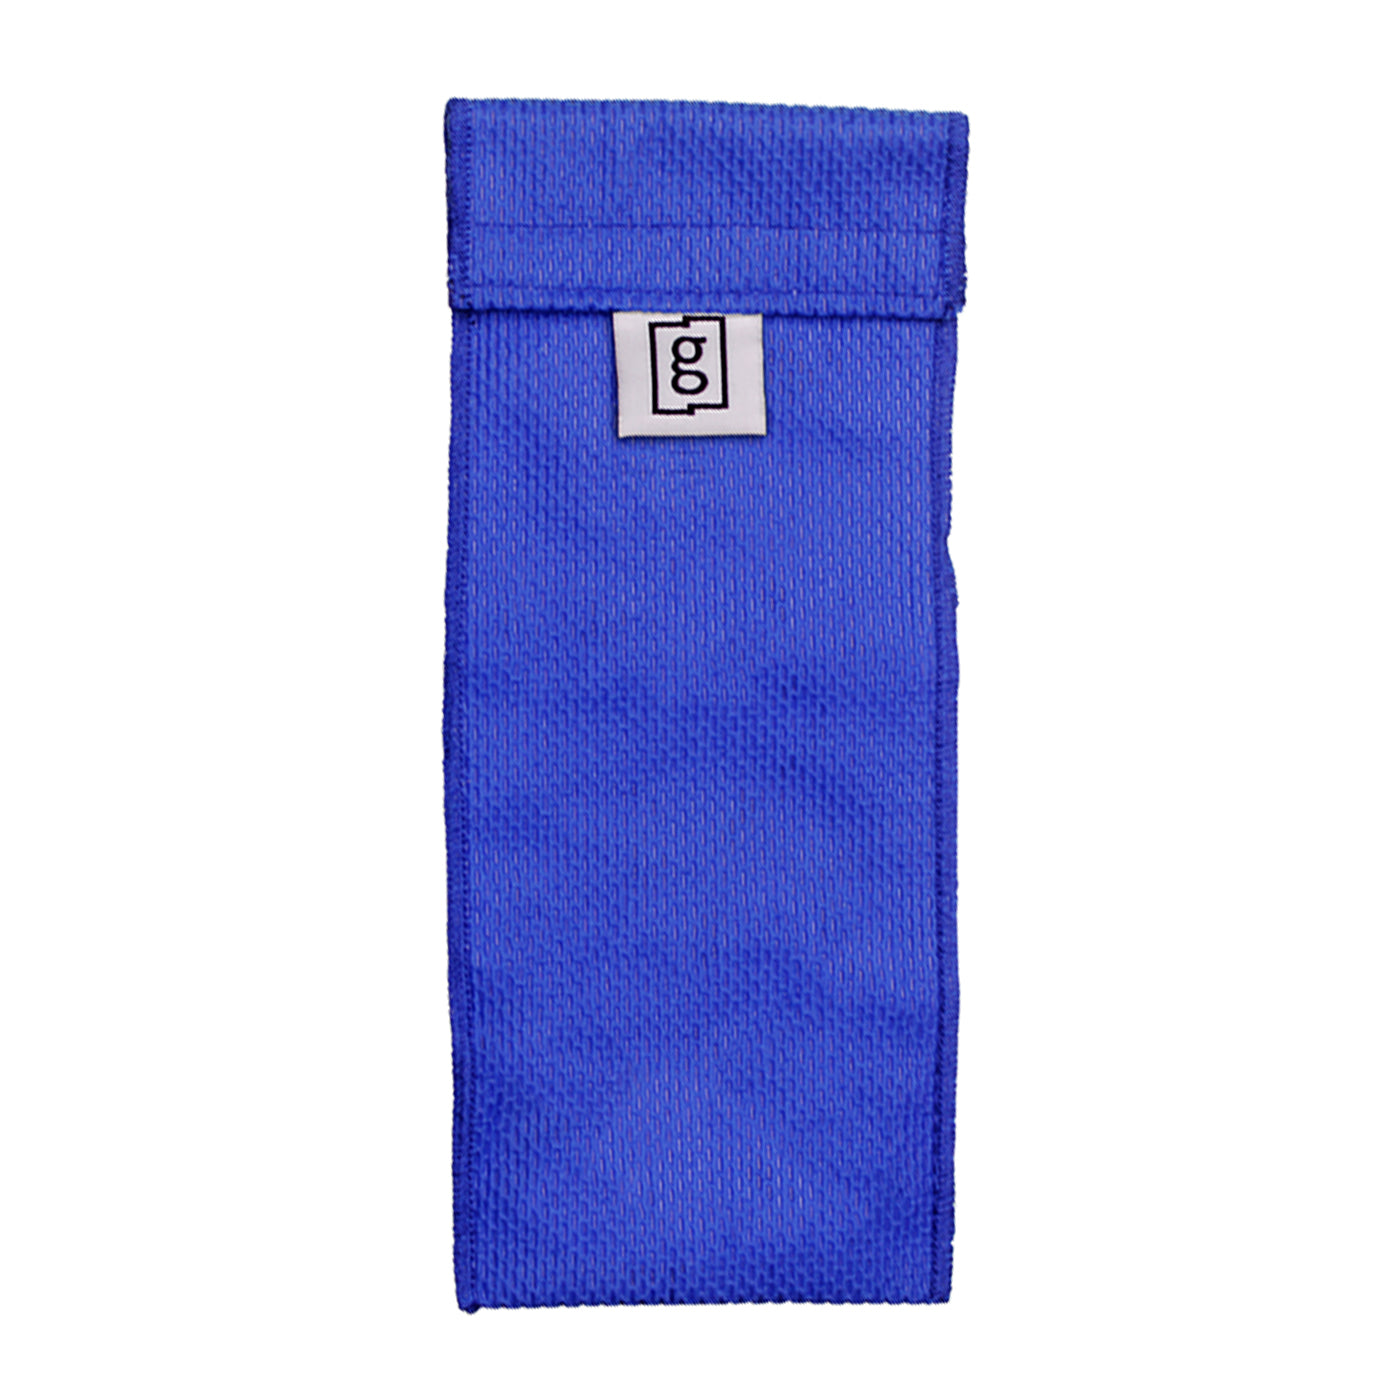 Glucology Duo Pen Cooling Wallet In Blue